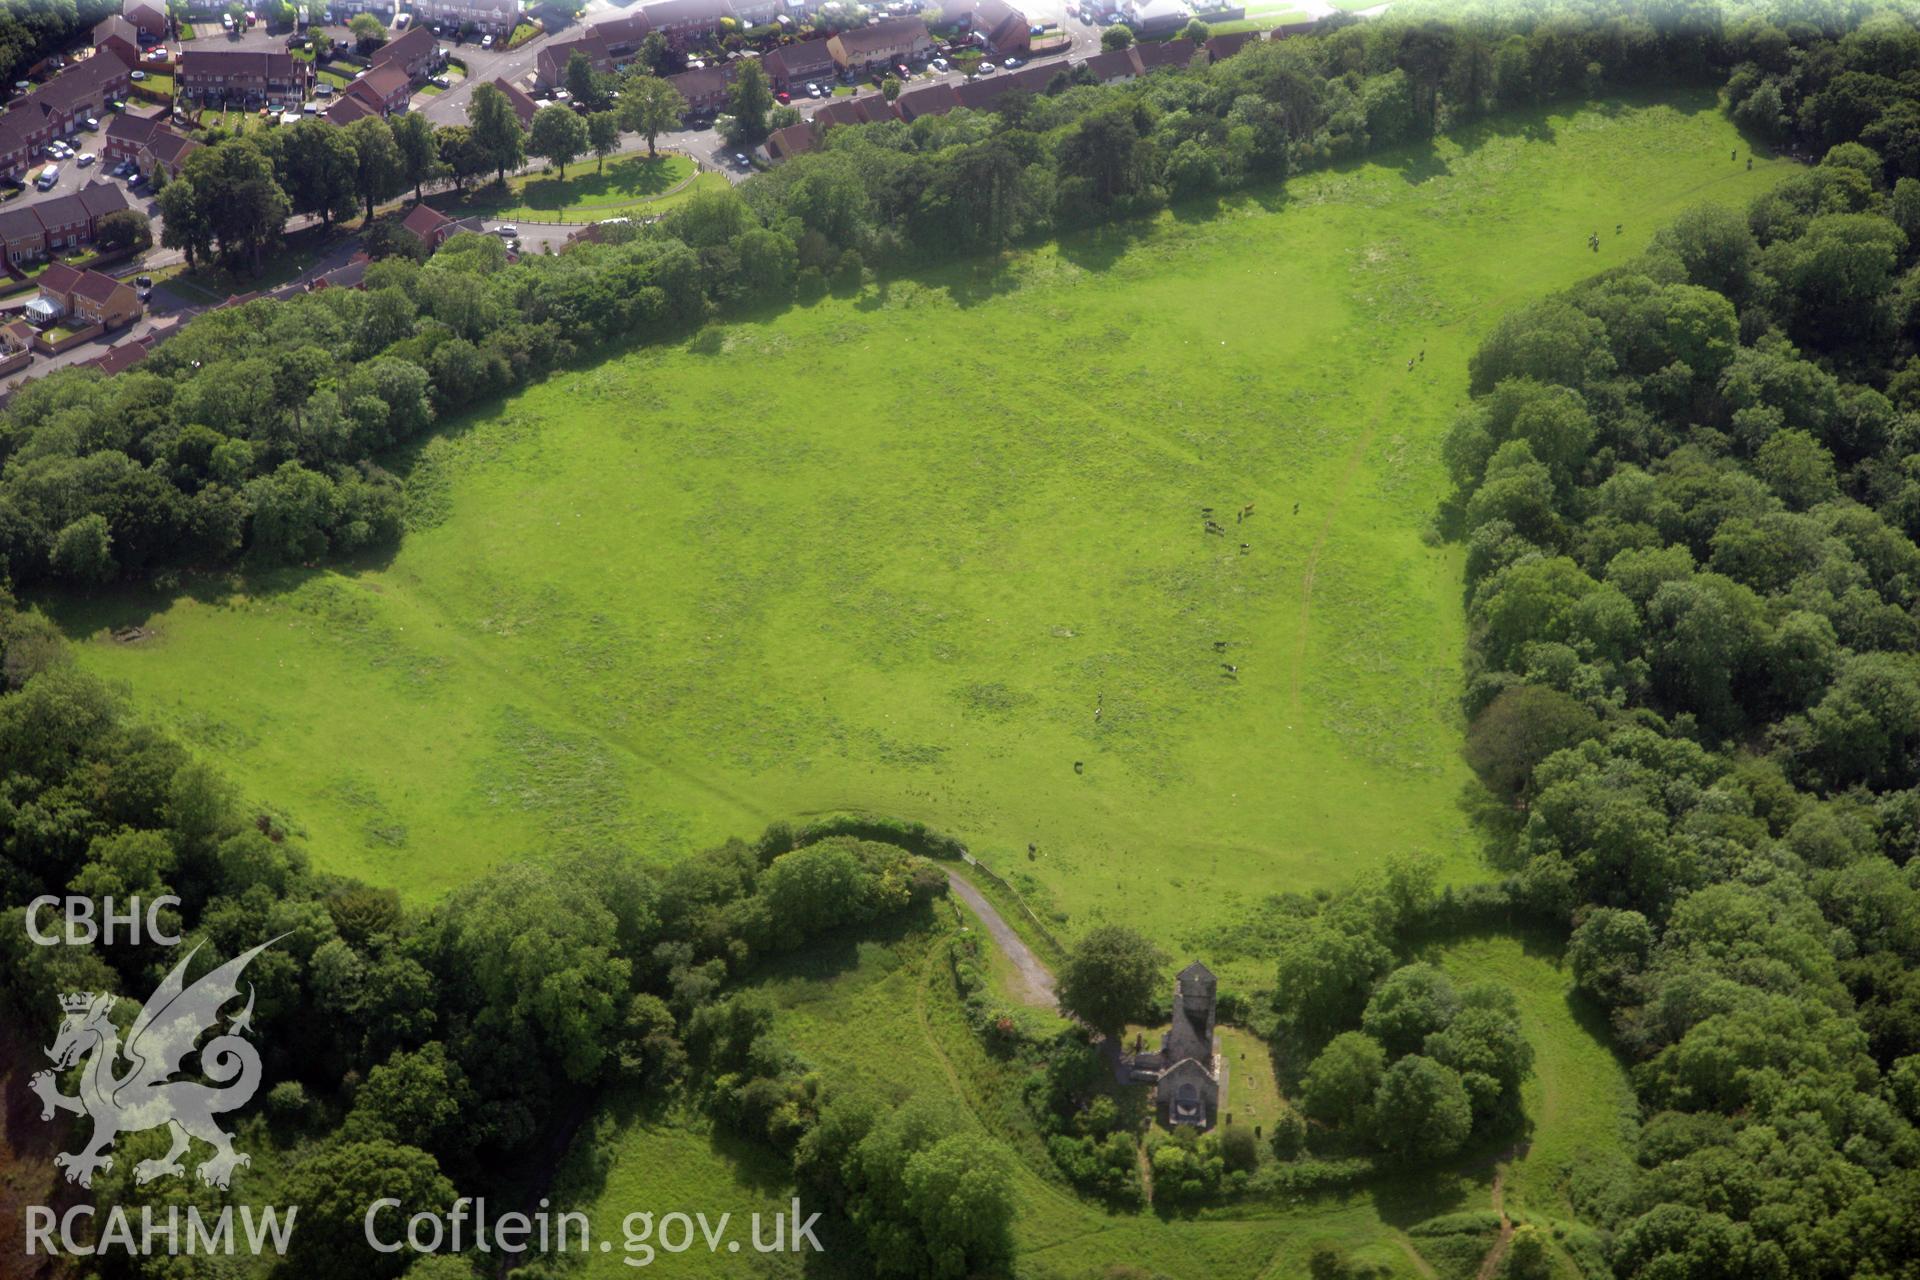 RCAHMW colour oblique photograph of Caerau Camp. Taken by Toby Driver on 13/06/2011.